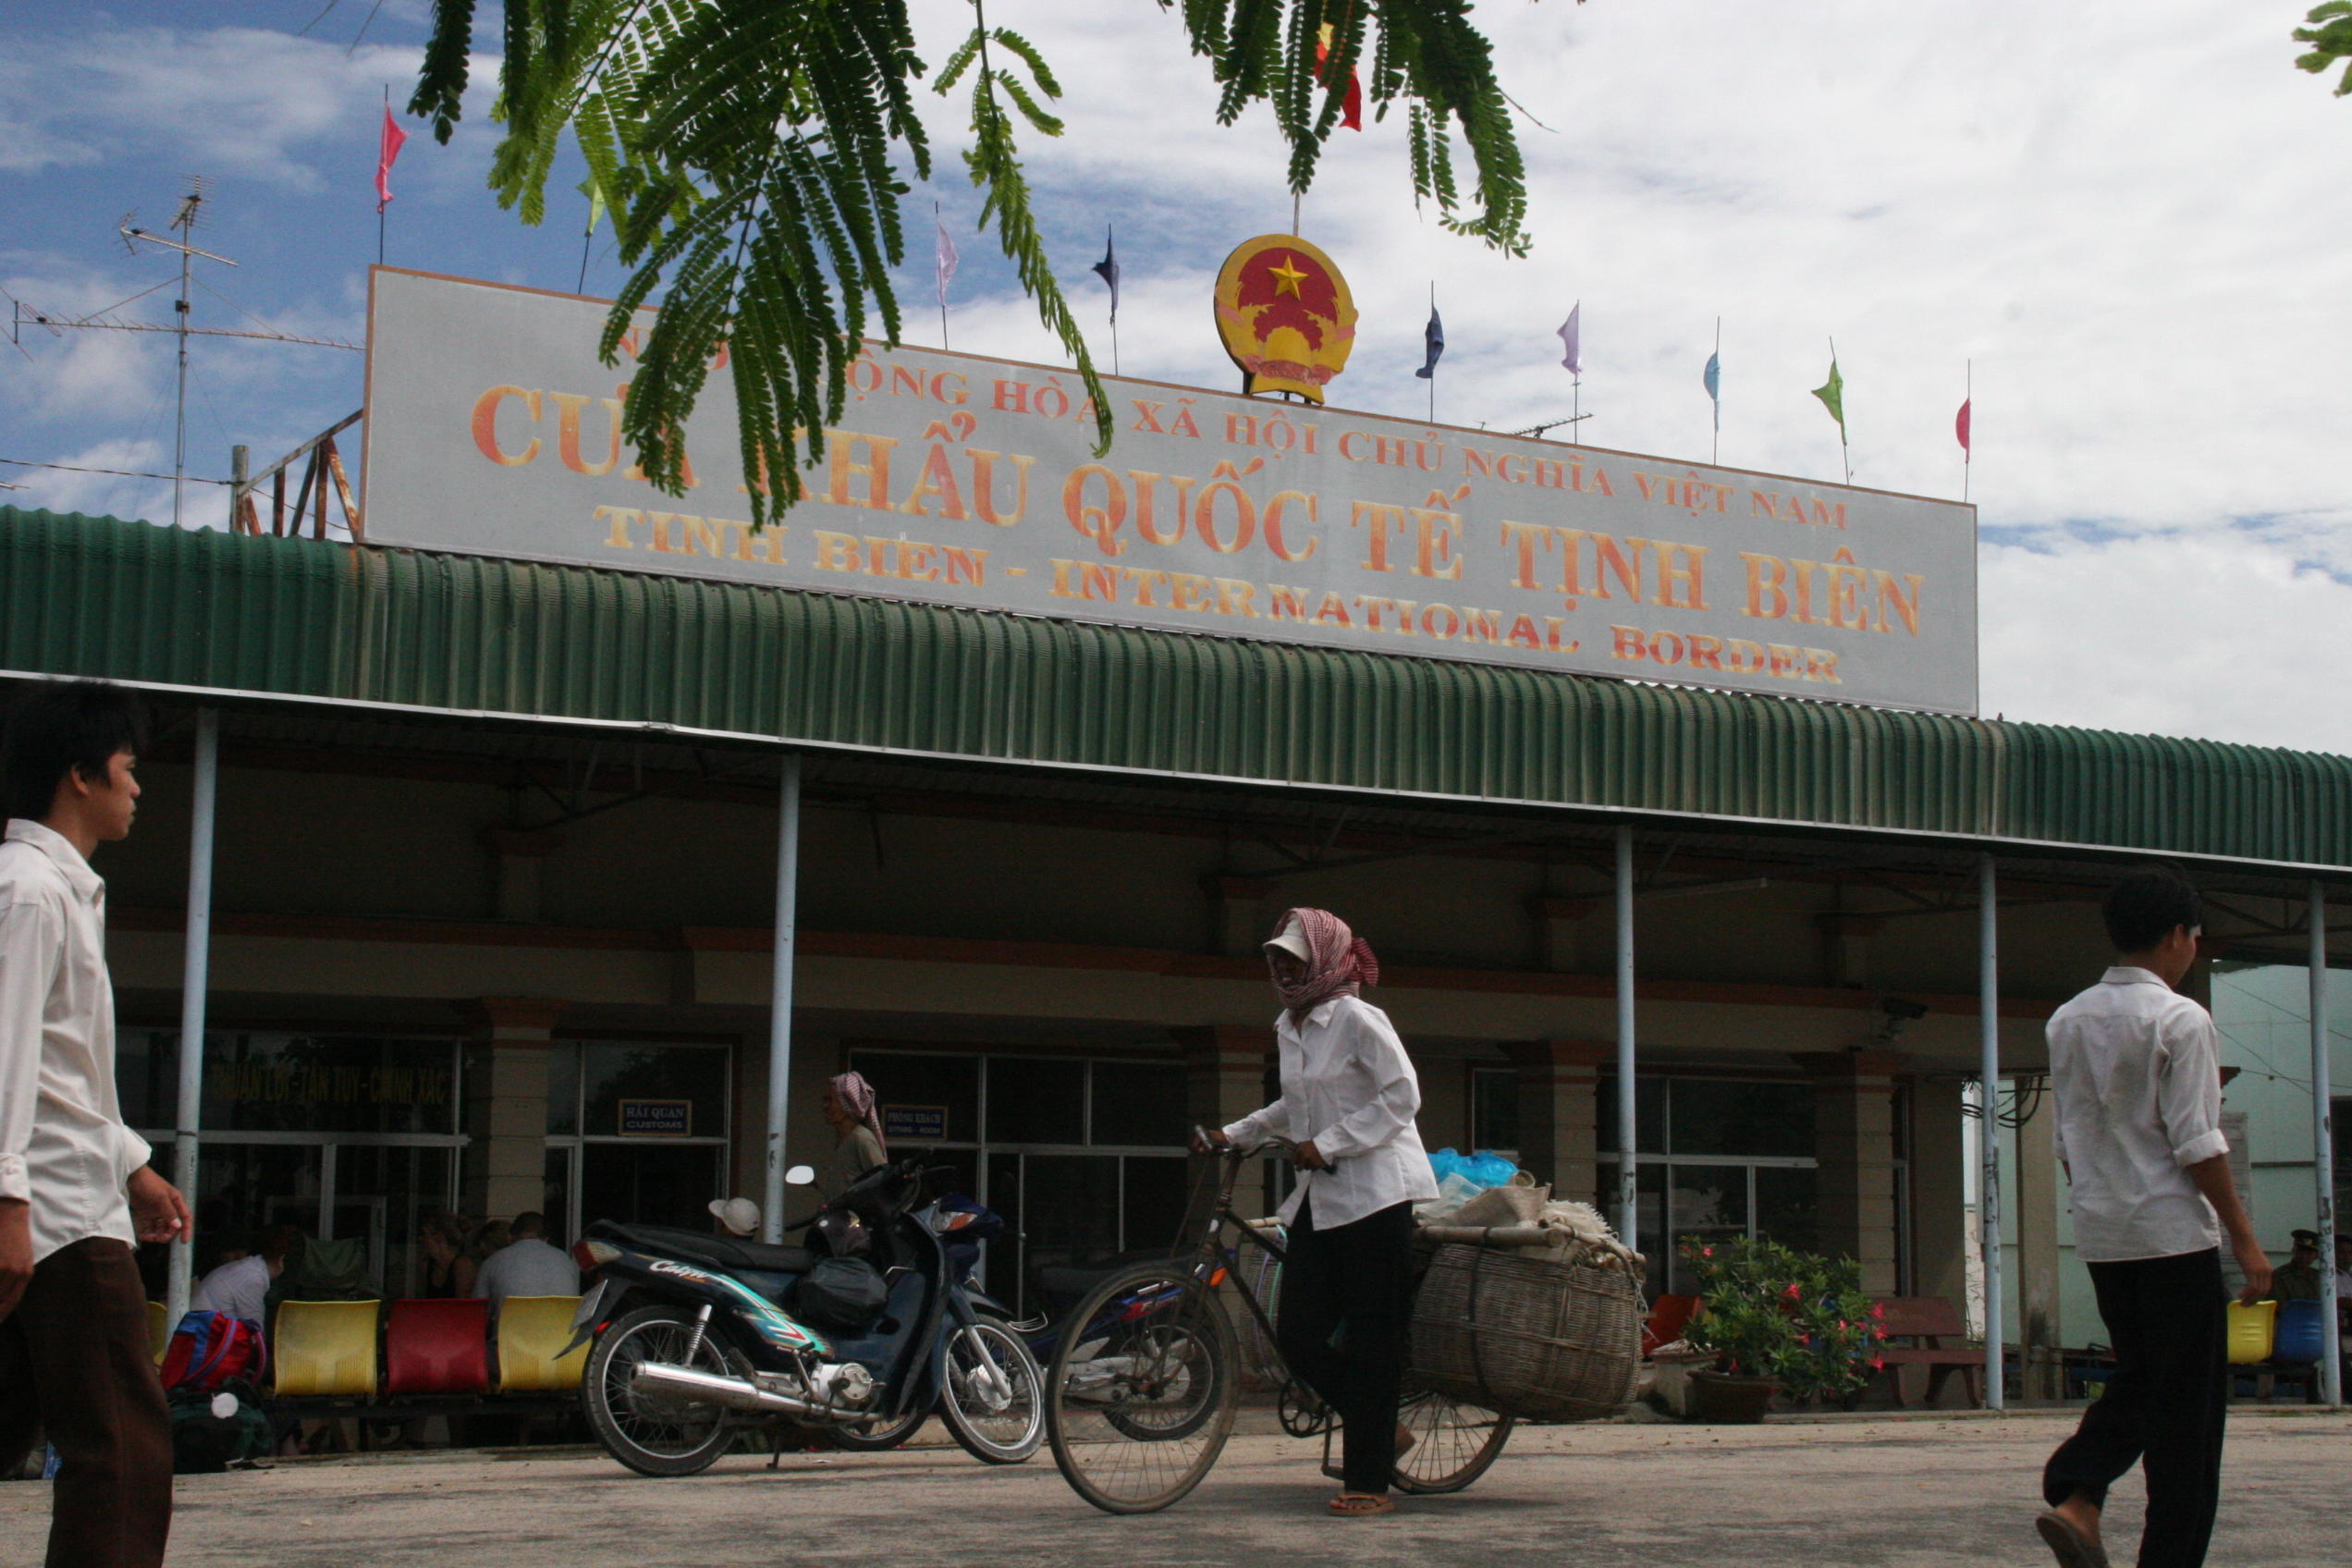 crossing border from Vietnam to South Cambodia at Tihn Bien